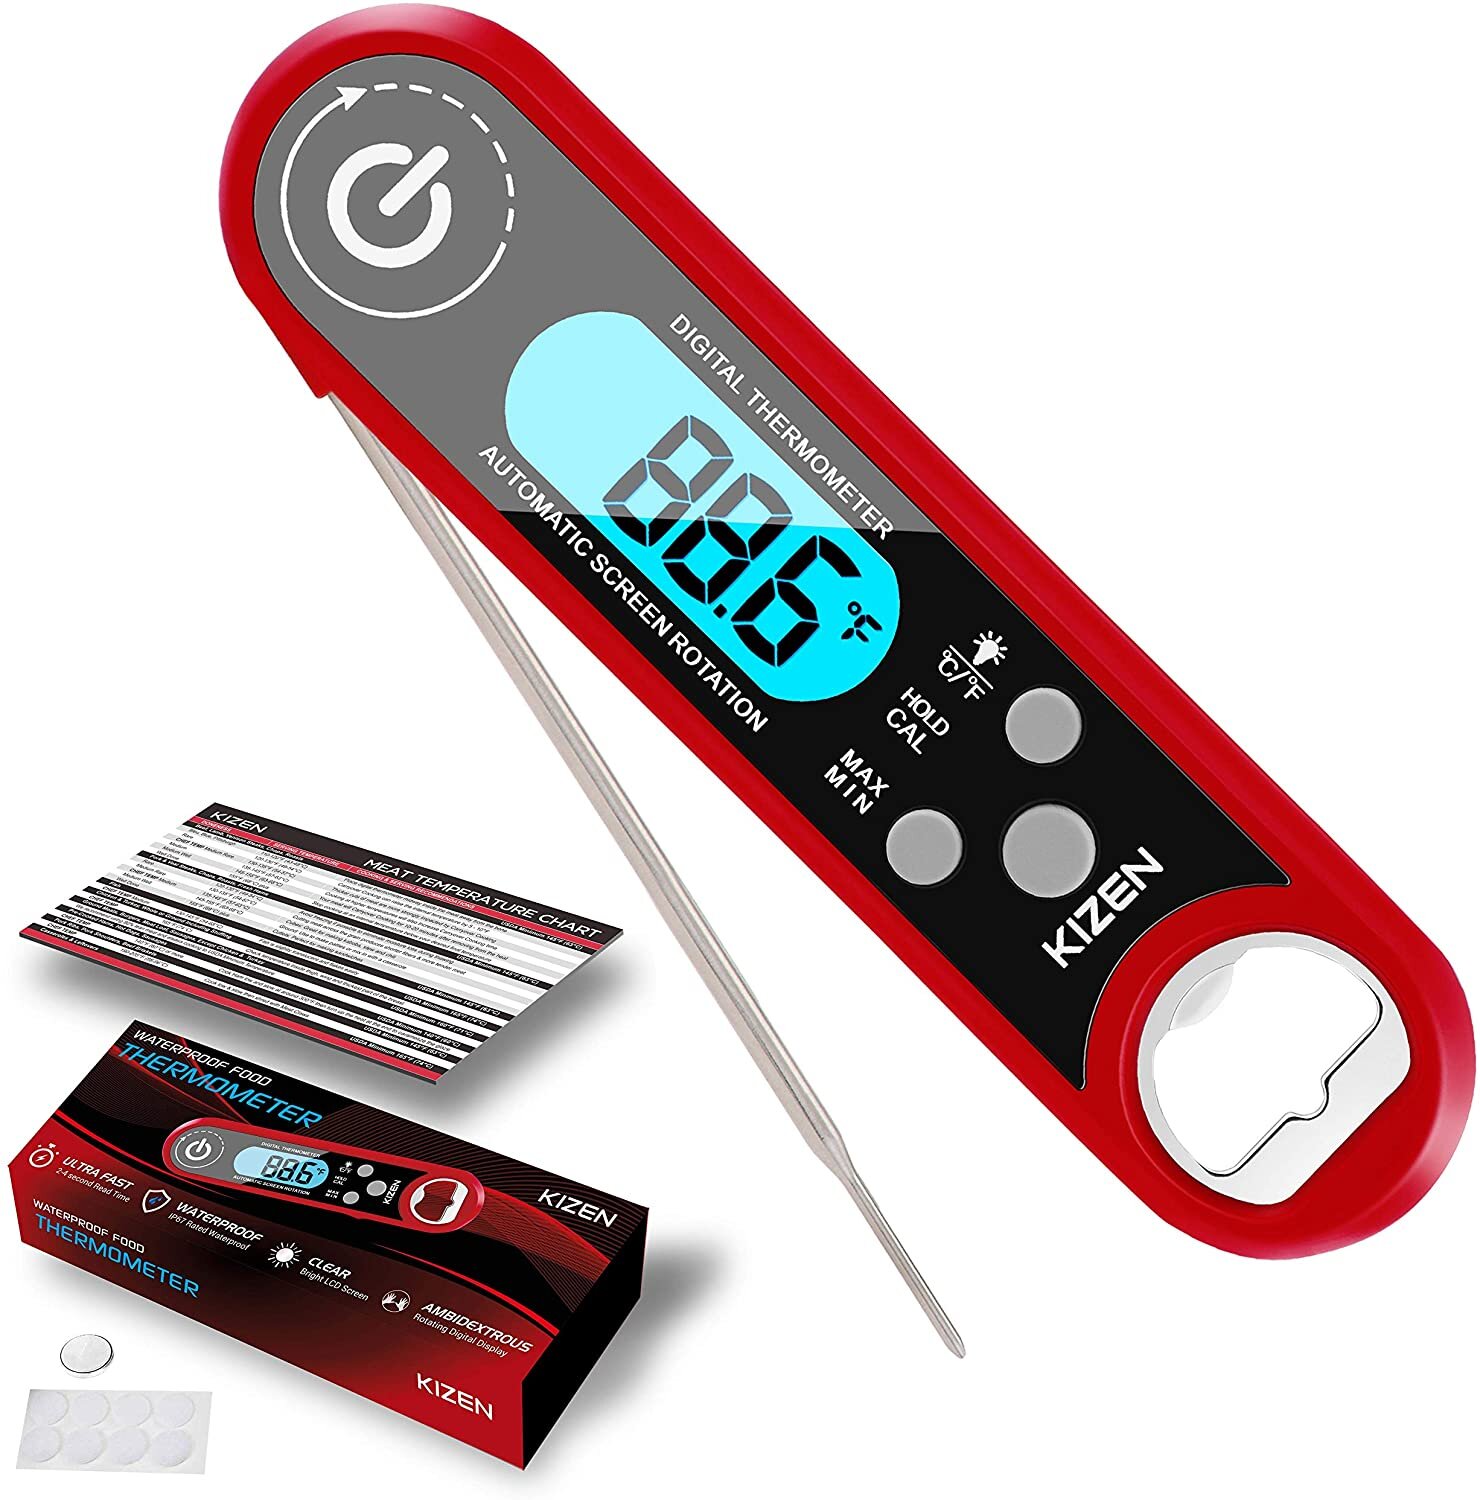 Kona Instant Read Meat Thermometer - Folding Waterproof Thermometer with Backlight & Calibration, Red